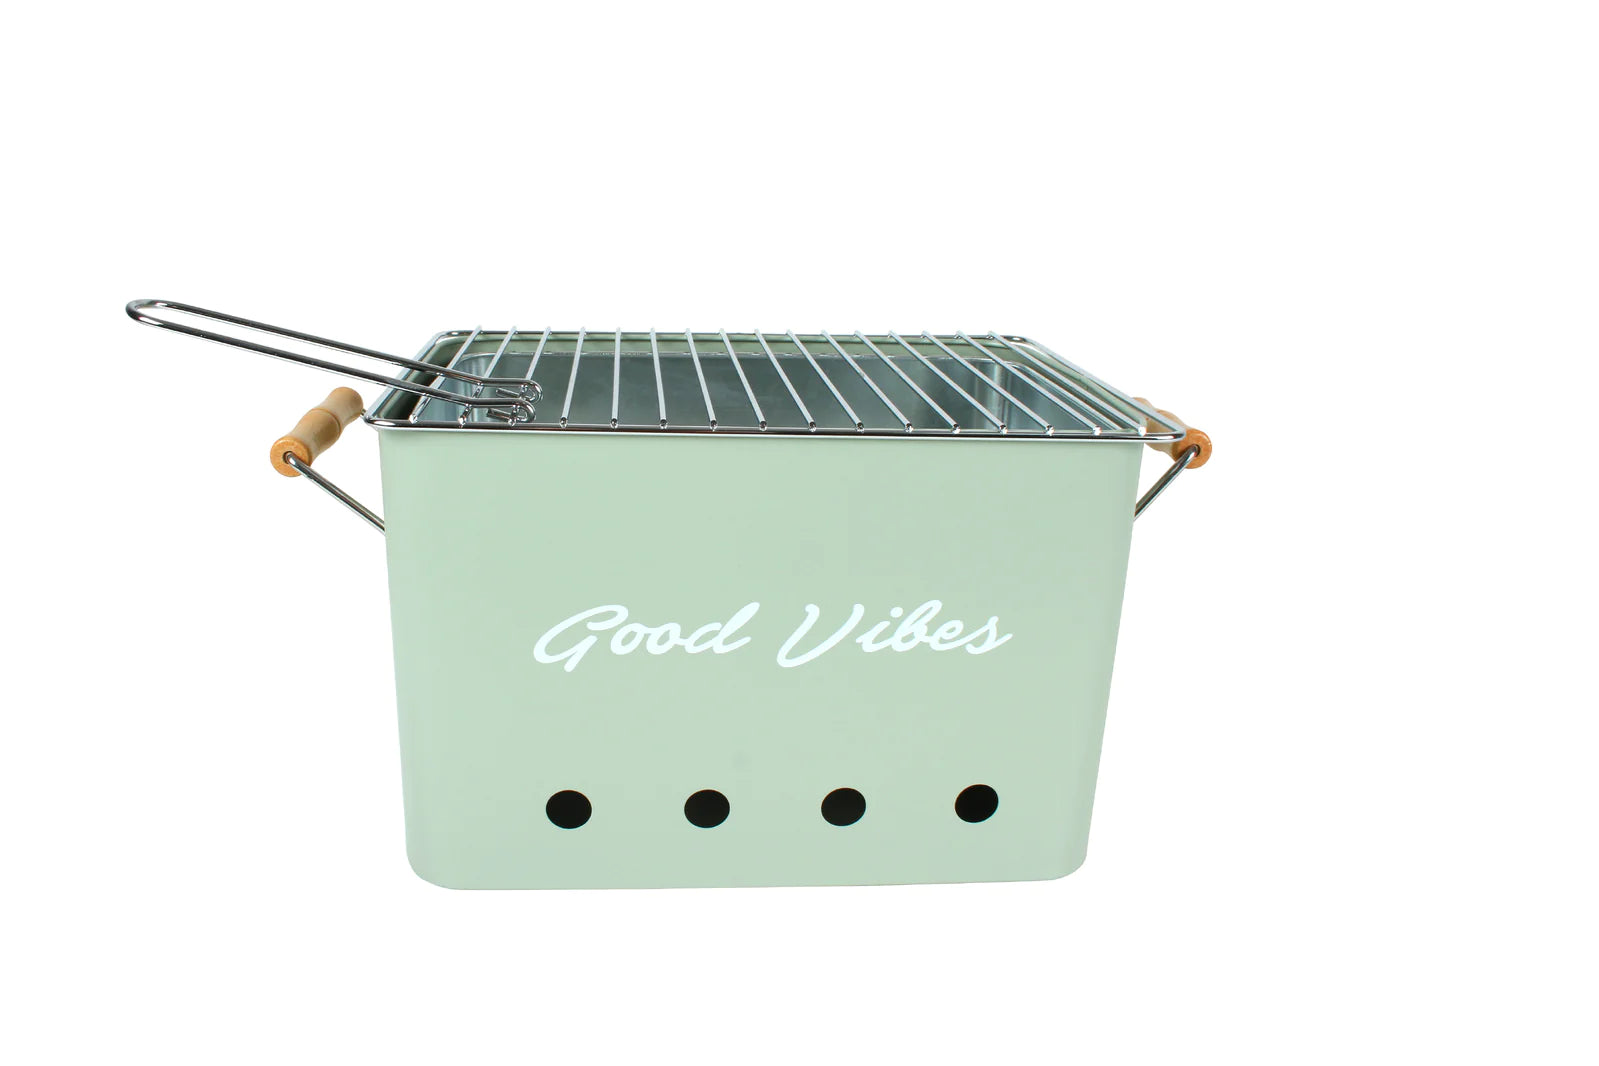 Good Vibes Portable Charcoal Beach Barbeque - Sage Green